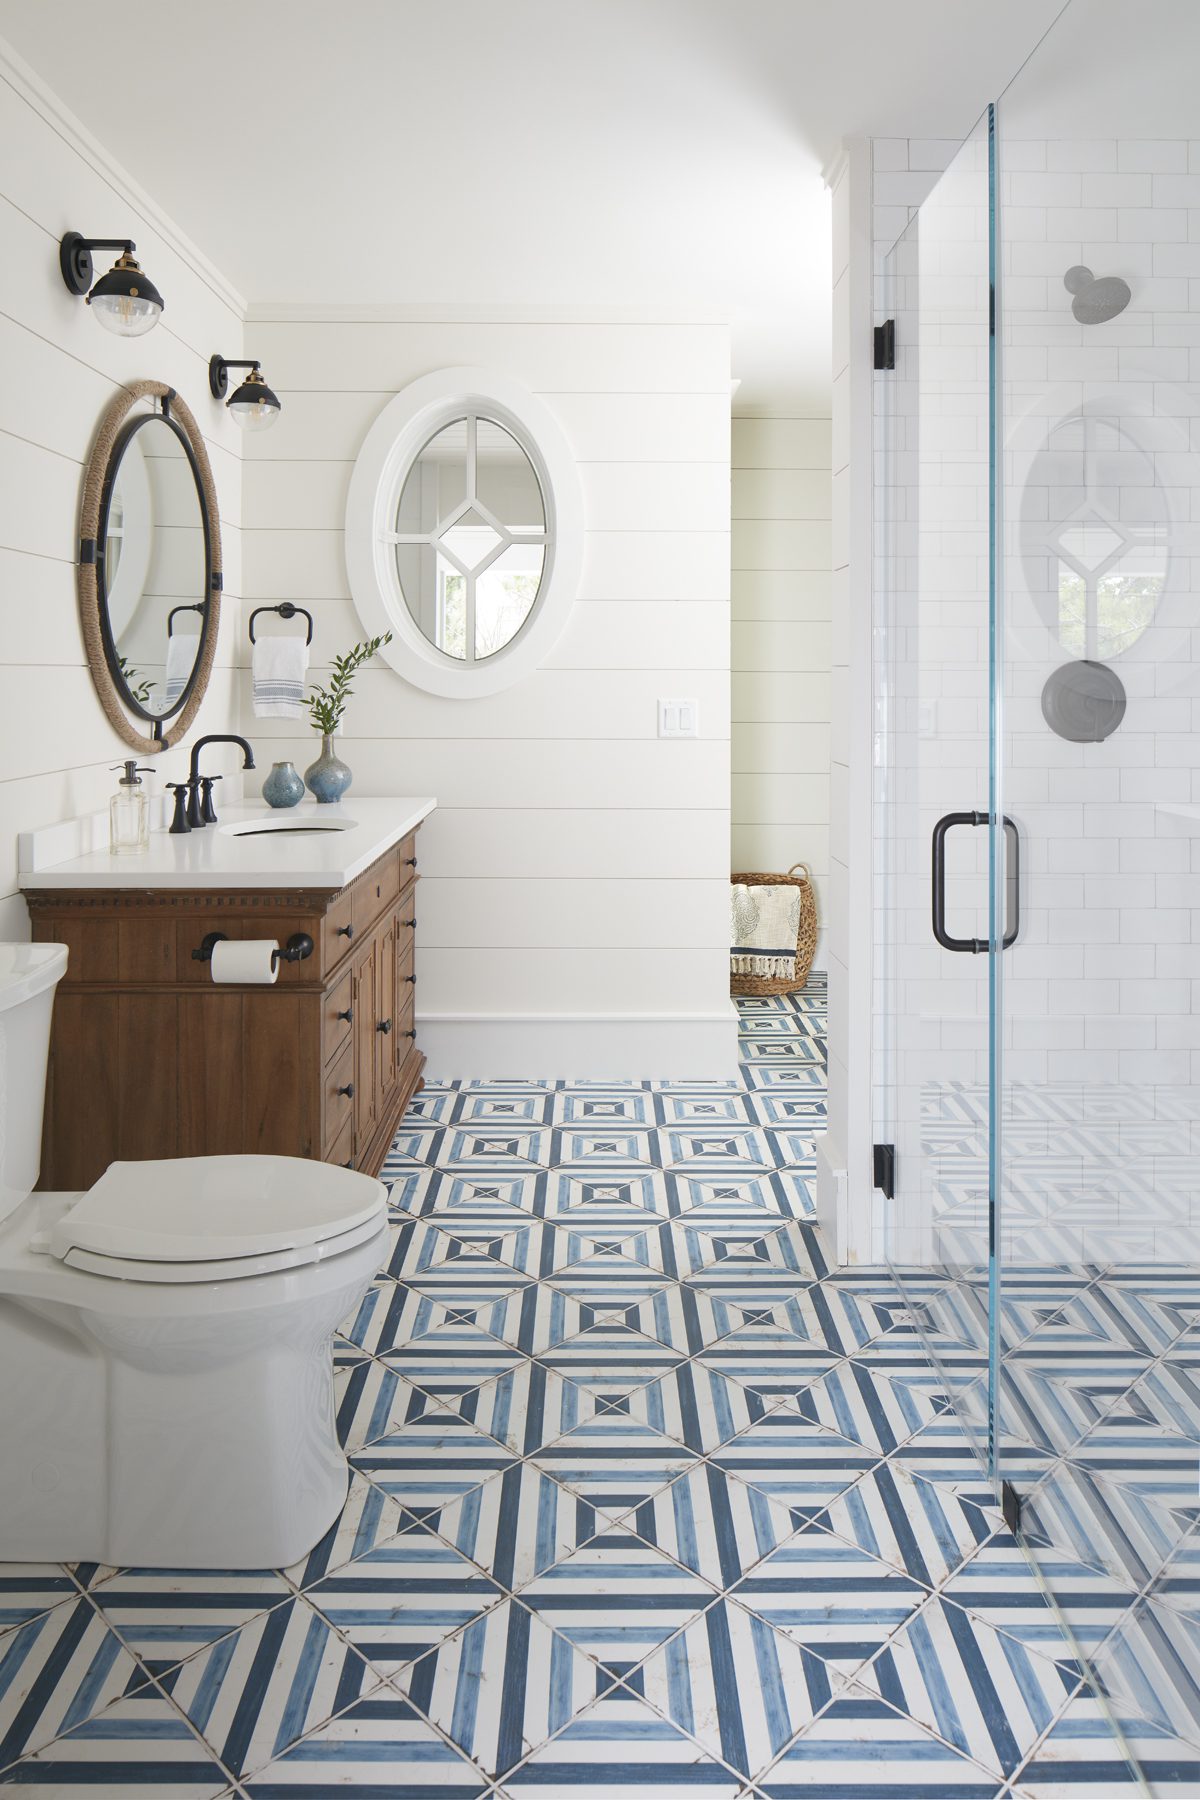 8 Things To Do BEFORE You Renovate Your Bathroom